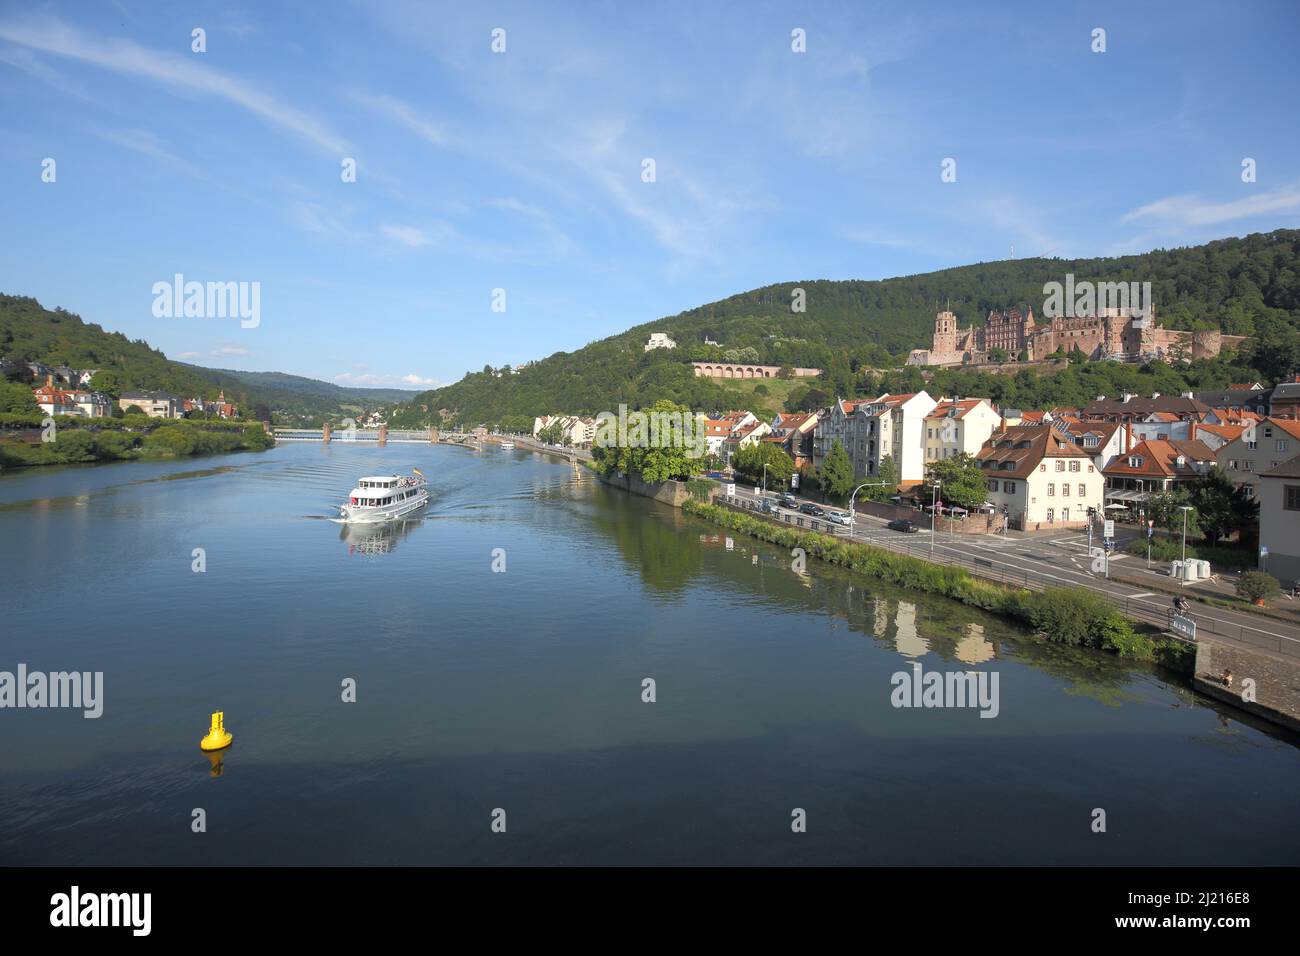 View from the Old Bridge into the Neckar Valley towards Heidelberg, Baden-Württemberg, Germany Stock Photo